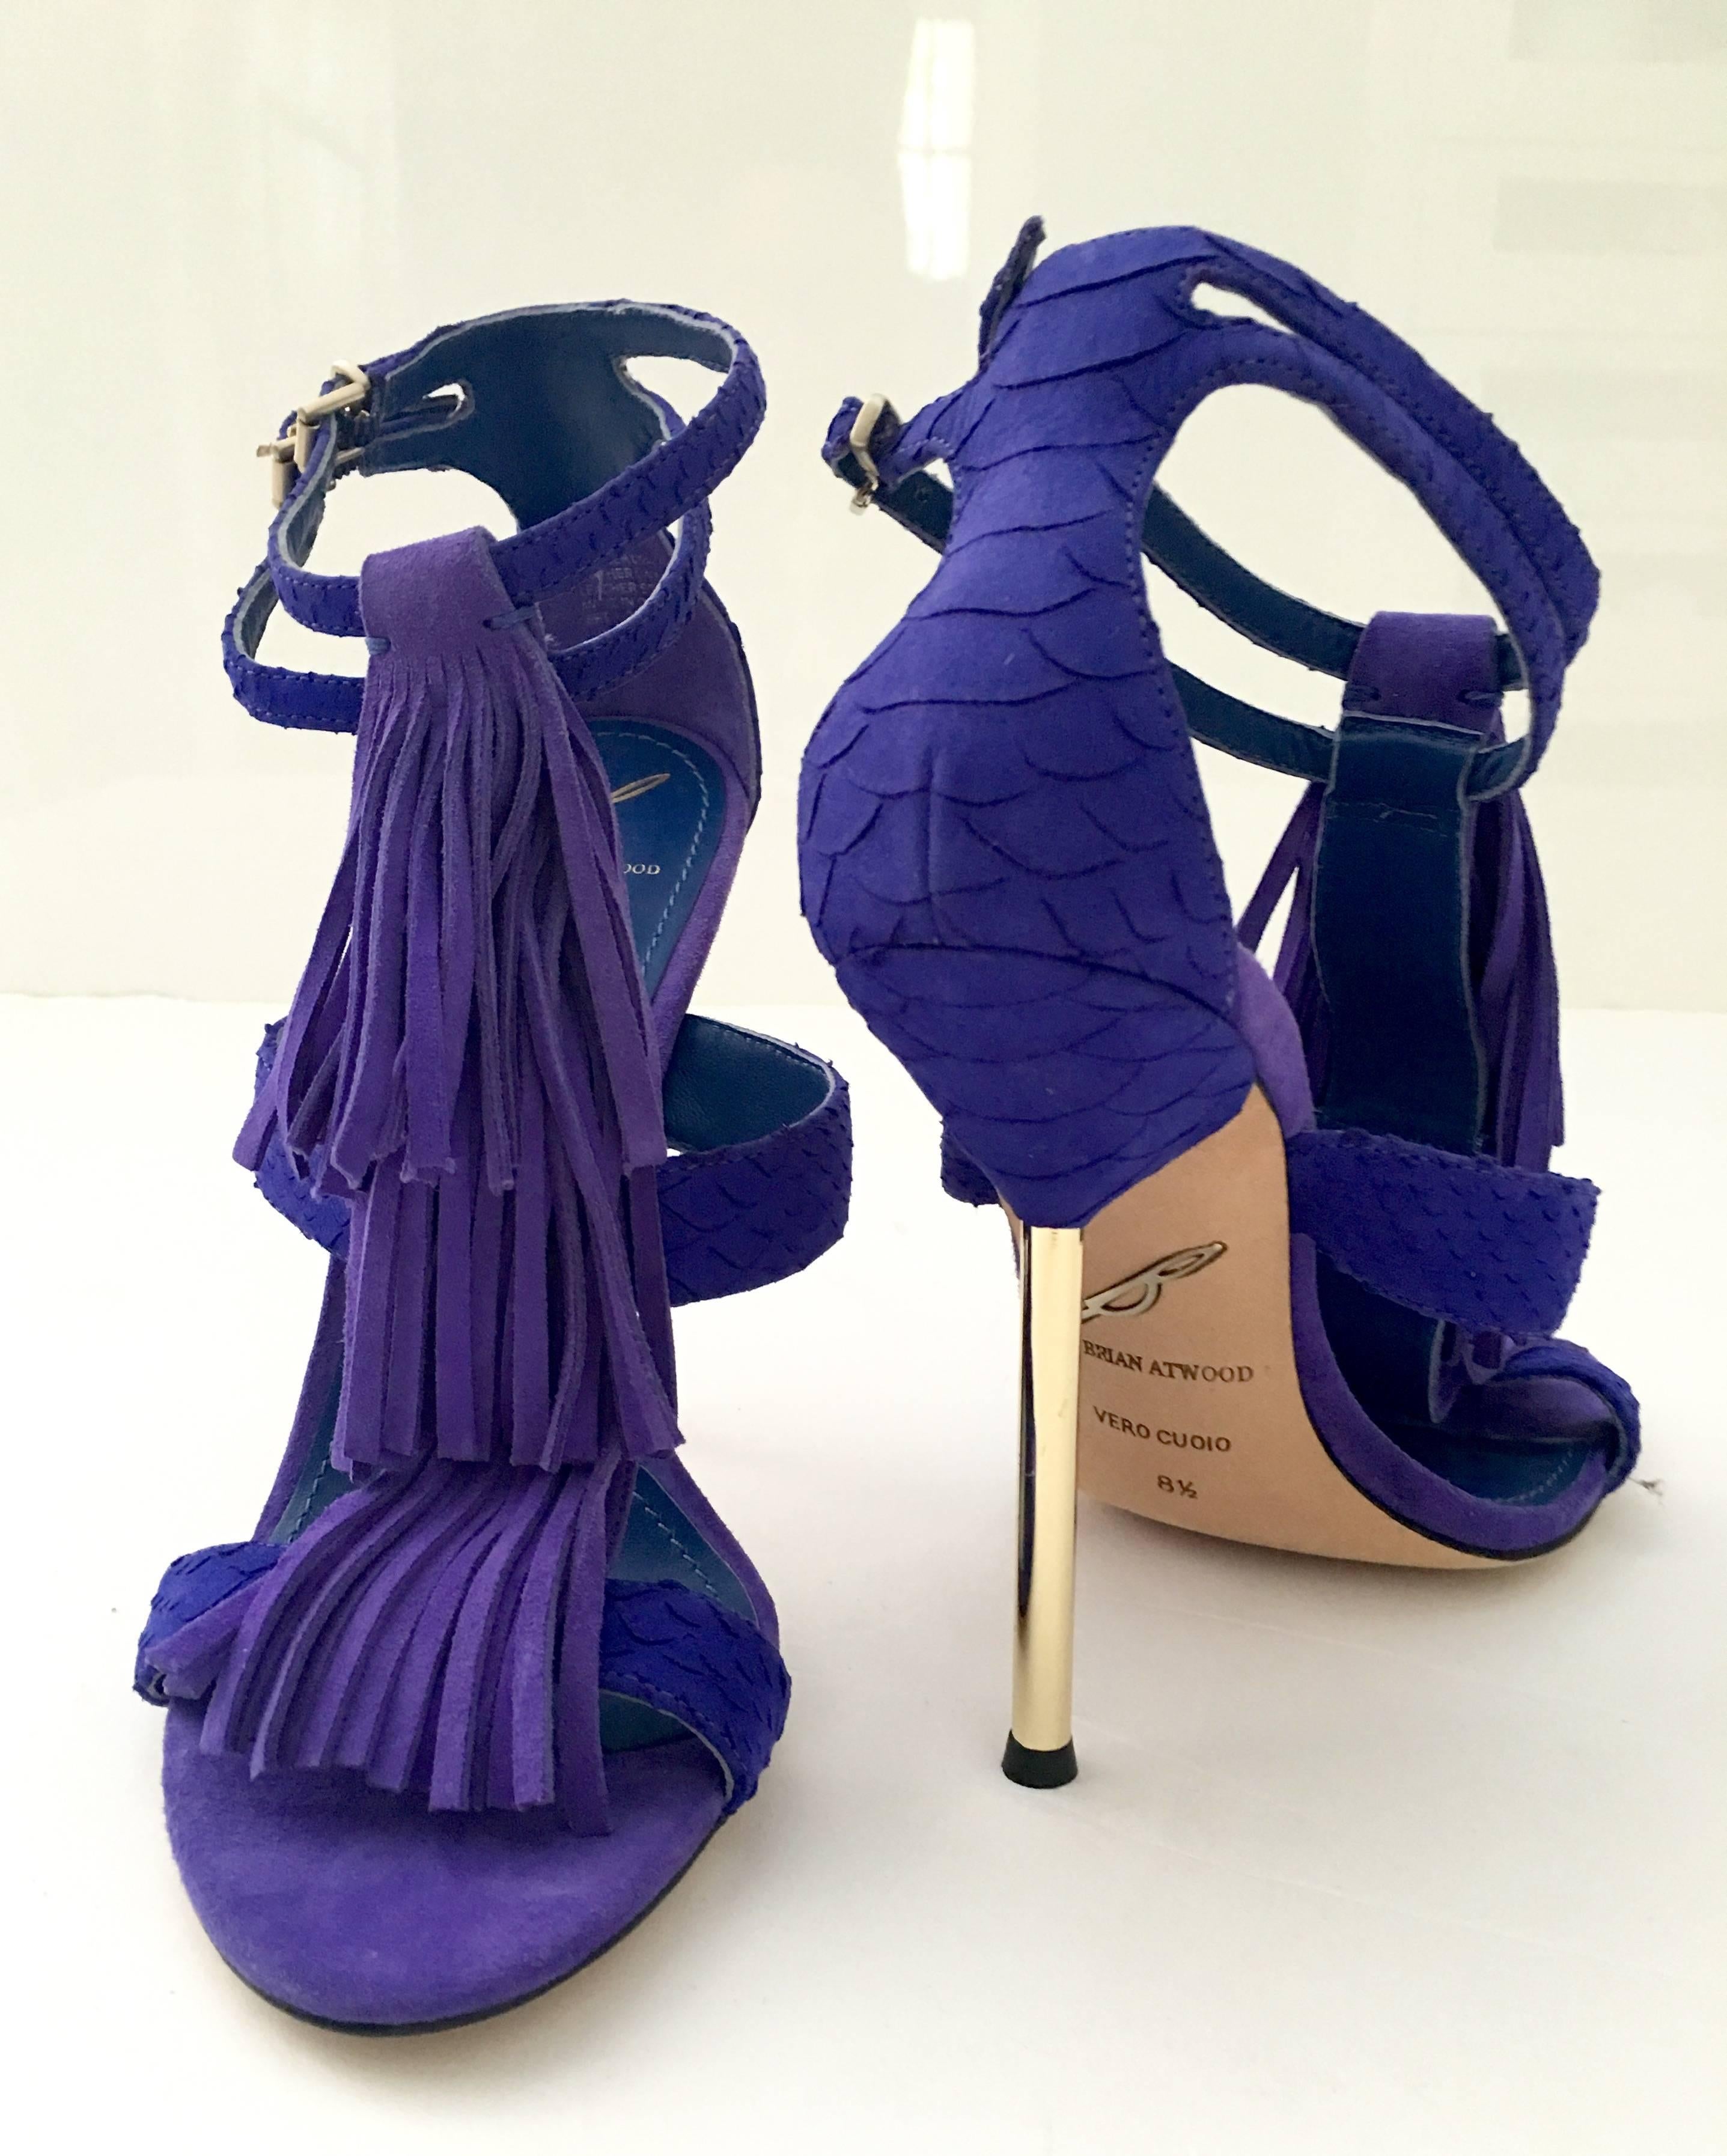 Brian Atwood new, never worn, gold-tone metal heels and Dual buckle closures at ankle straps. Bright purple snake skin print fringe detail. Gold heels and hardware, heel is 4'5" high.
New-floor sample
